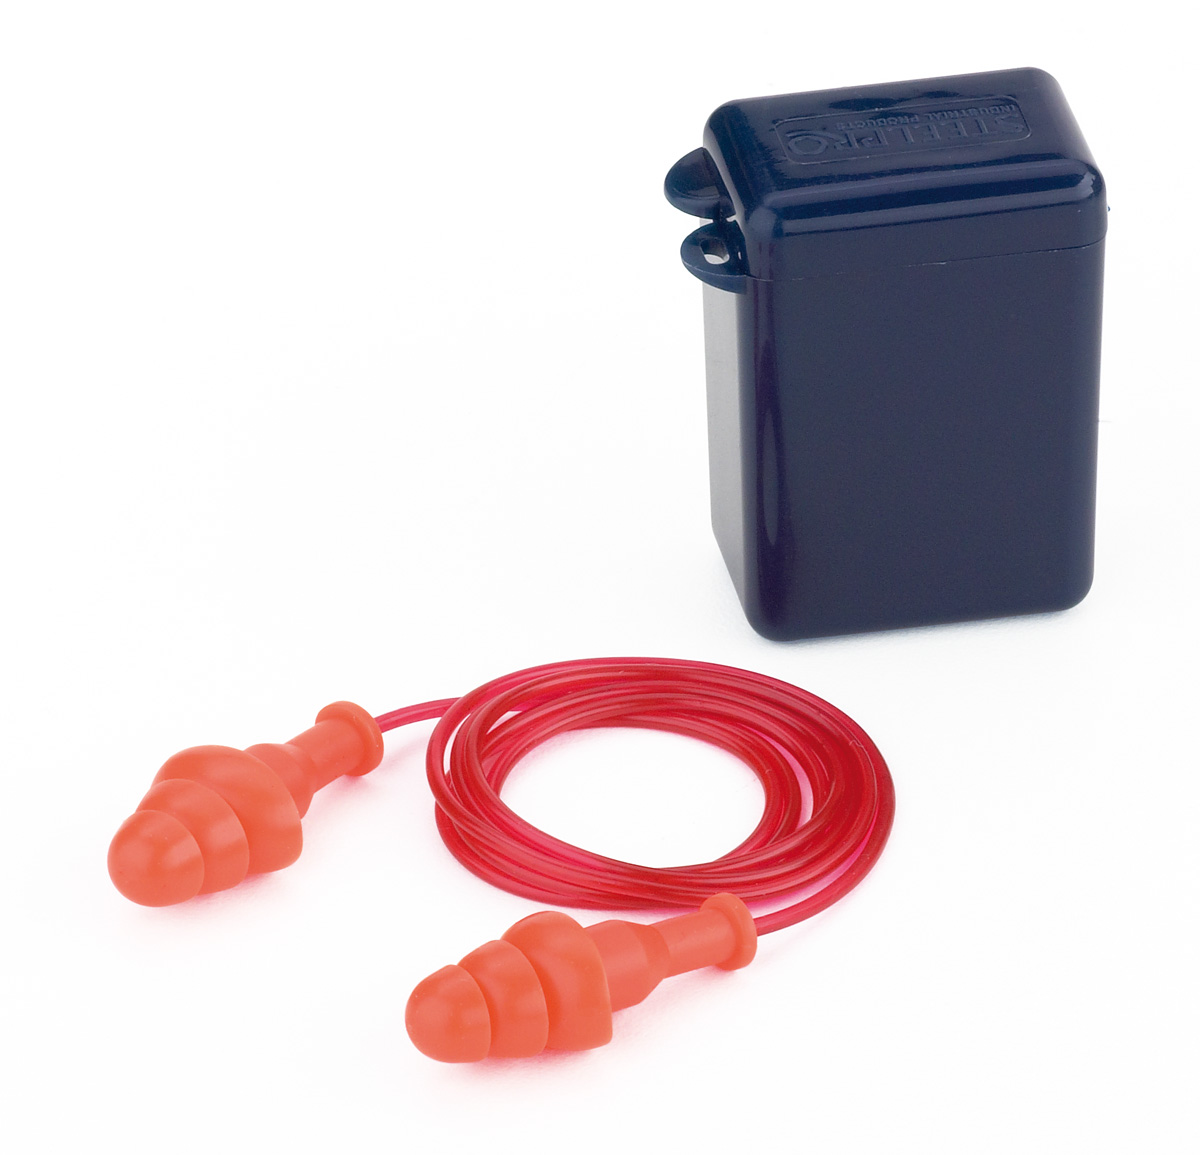 1988-TRCE Hearing Protection Reusable earplugs Mod. 'FIT BASIC'. Reusable silicone ear plug with cord.